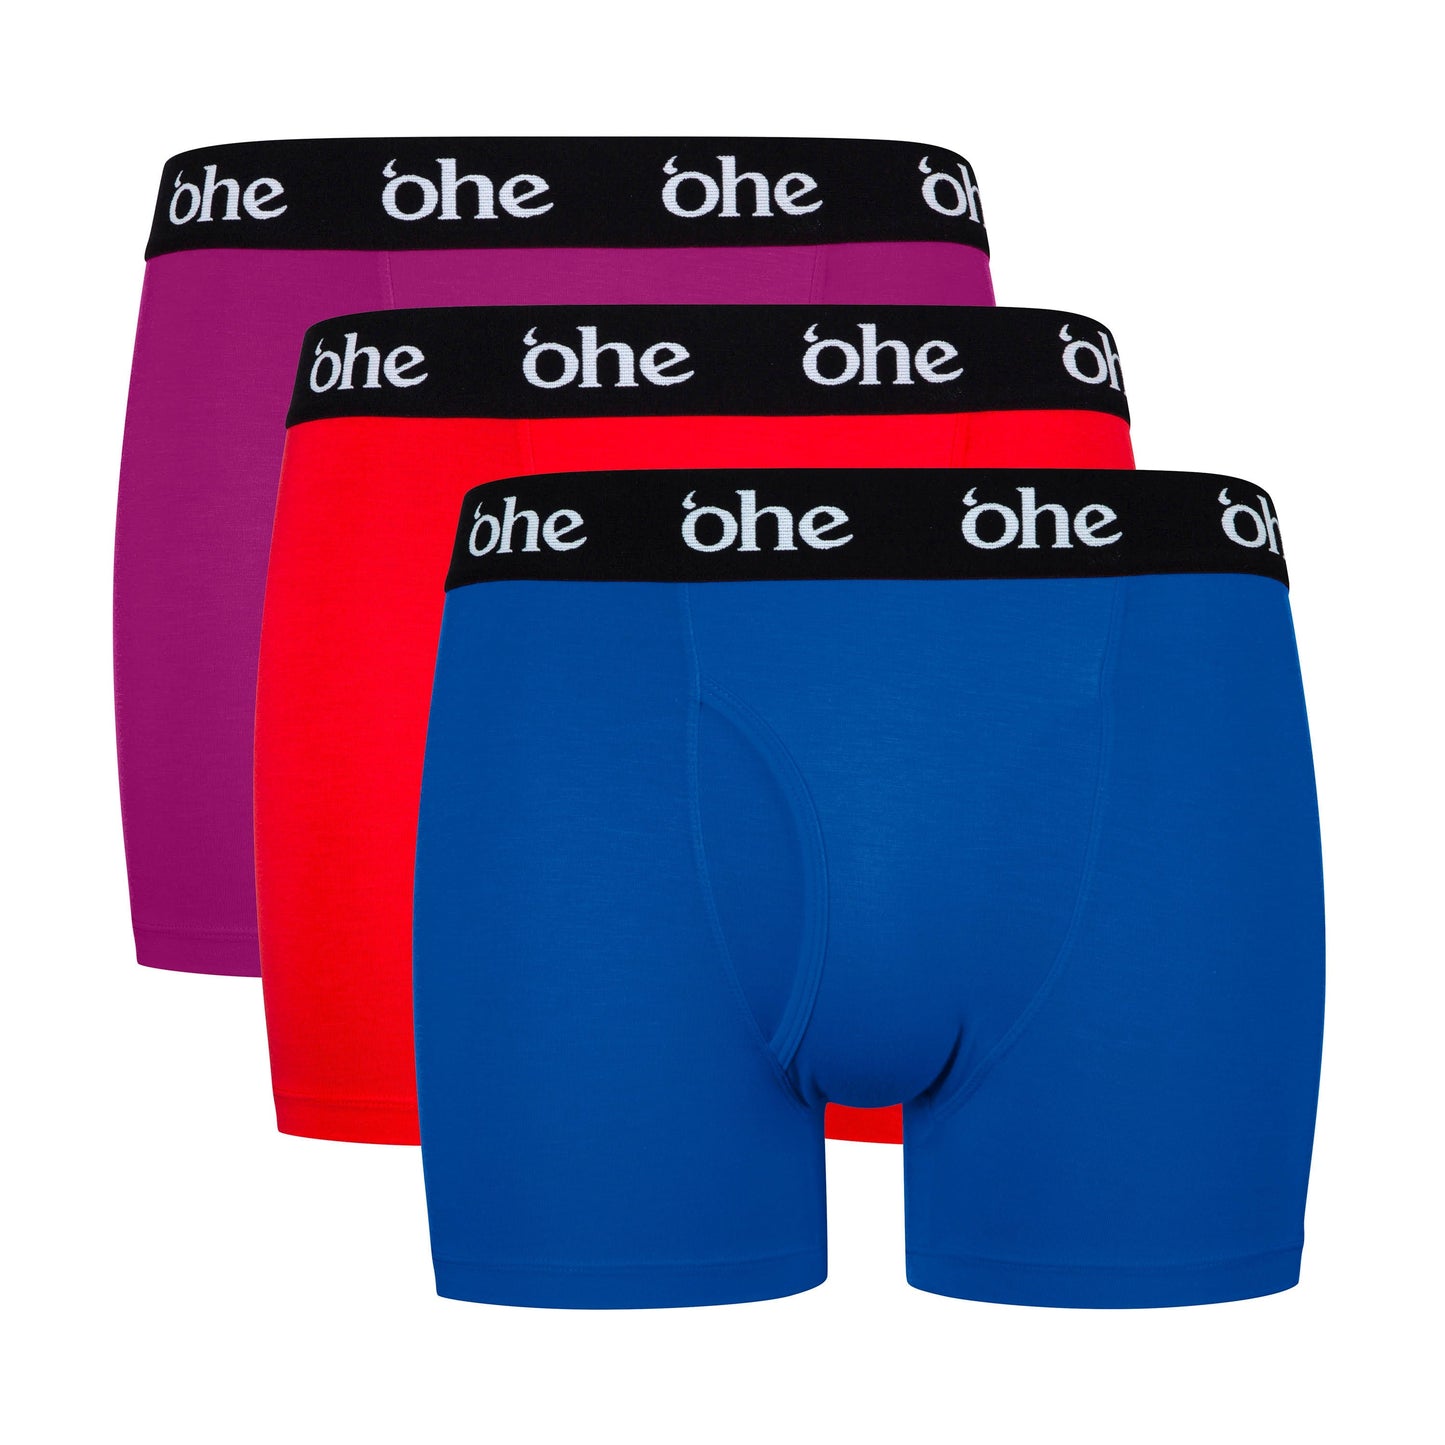 Stacked view of blue, red and purple men's bamboo underwear boxer shorts with black waist band and white 'ohe logo